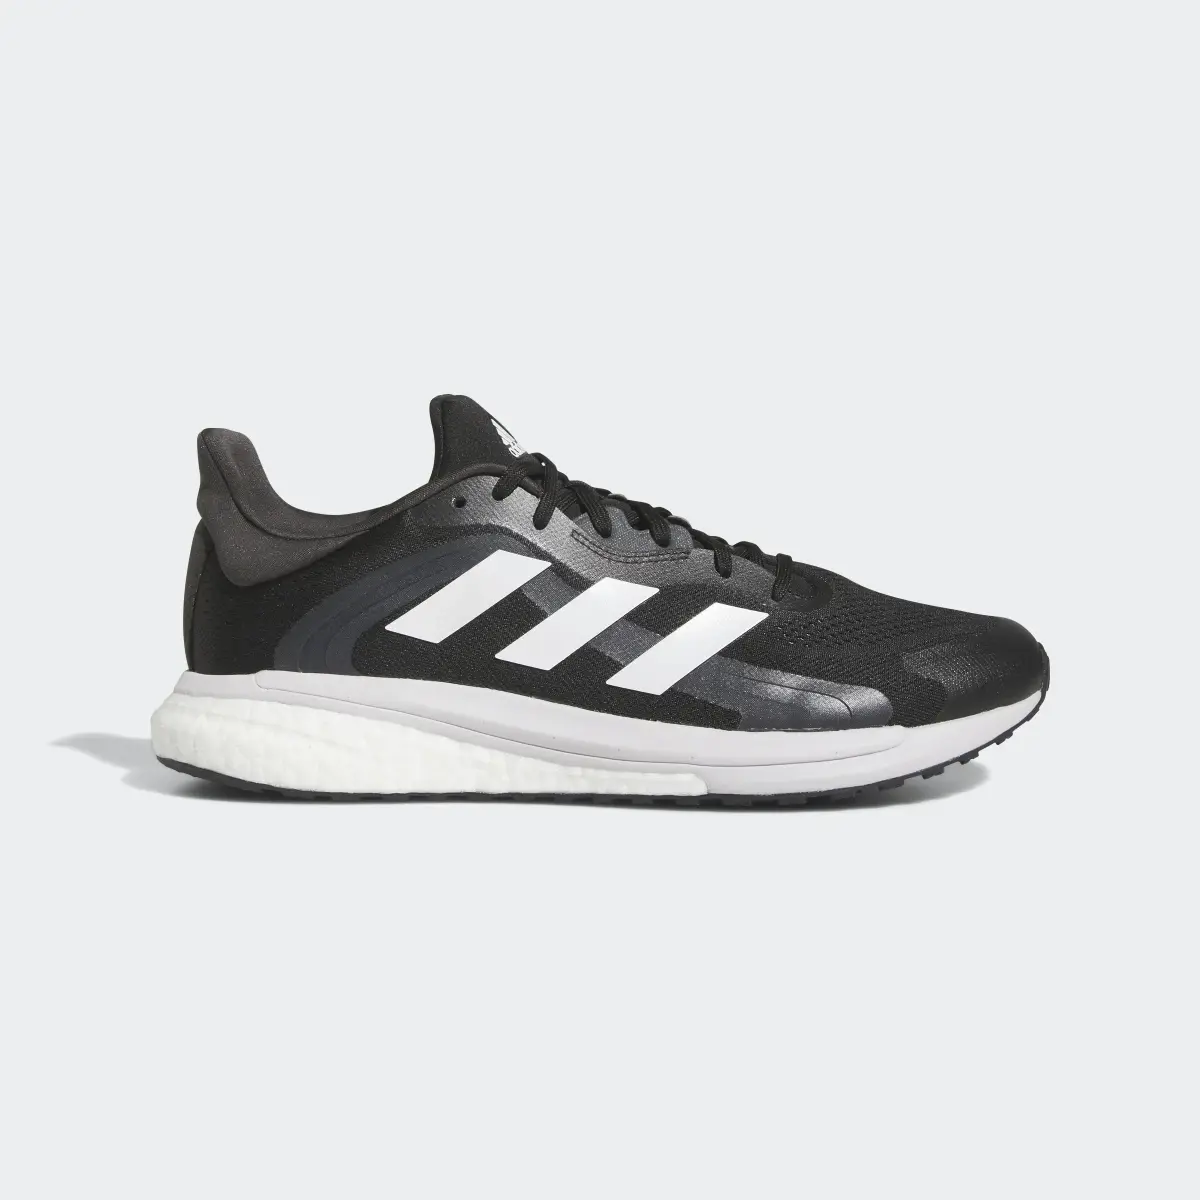 Adidas Sapatilhas SolarGlide 4 ST. 2